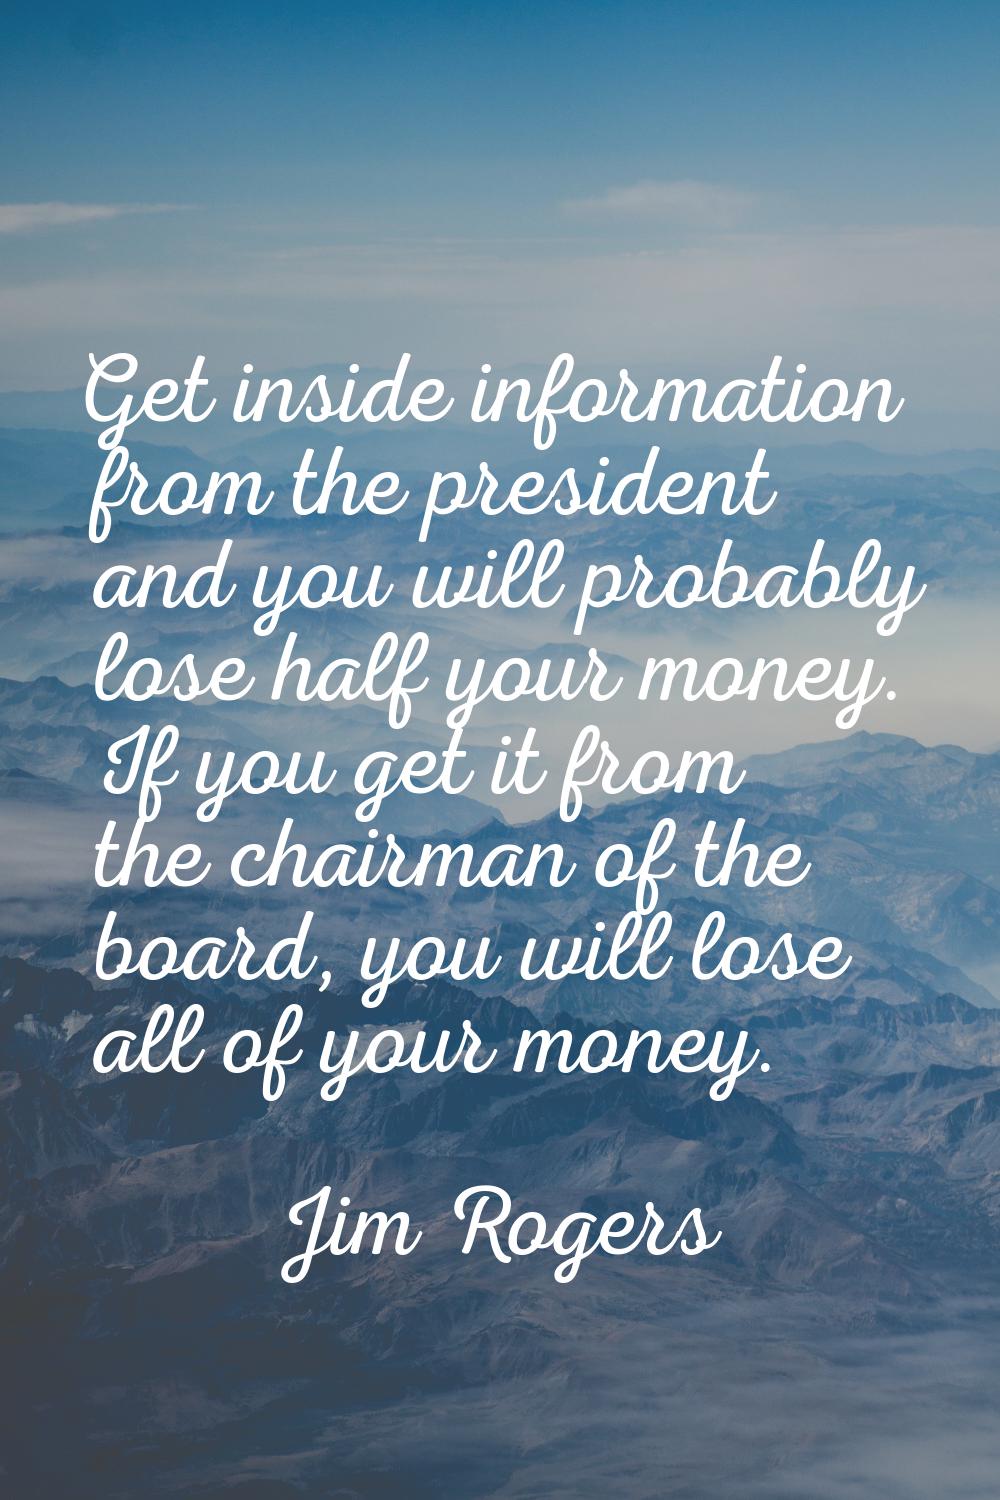 Get inside information from the president and you will probably lose half your money. If you get it